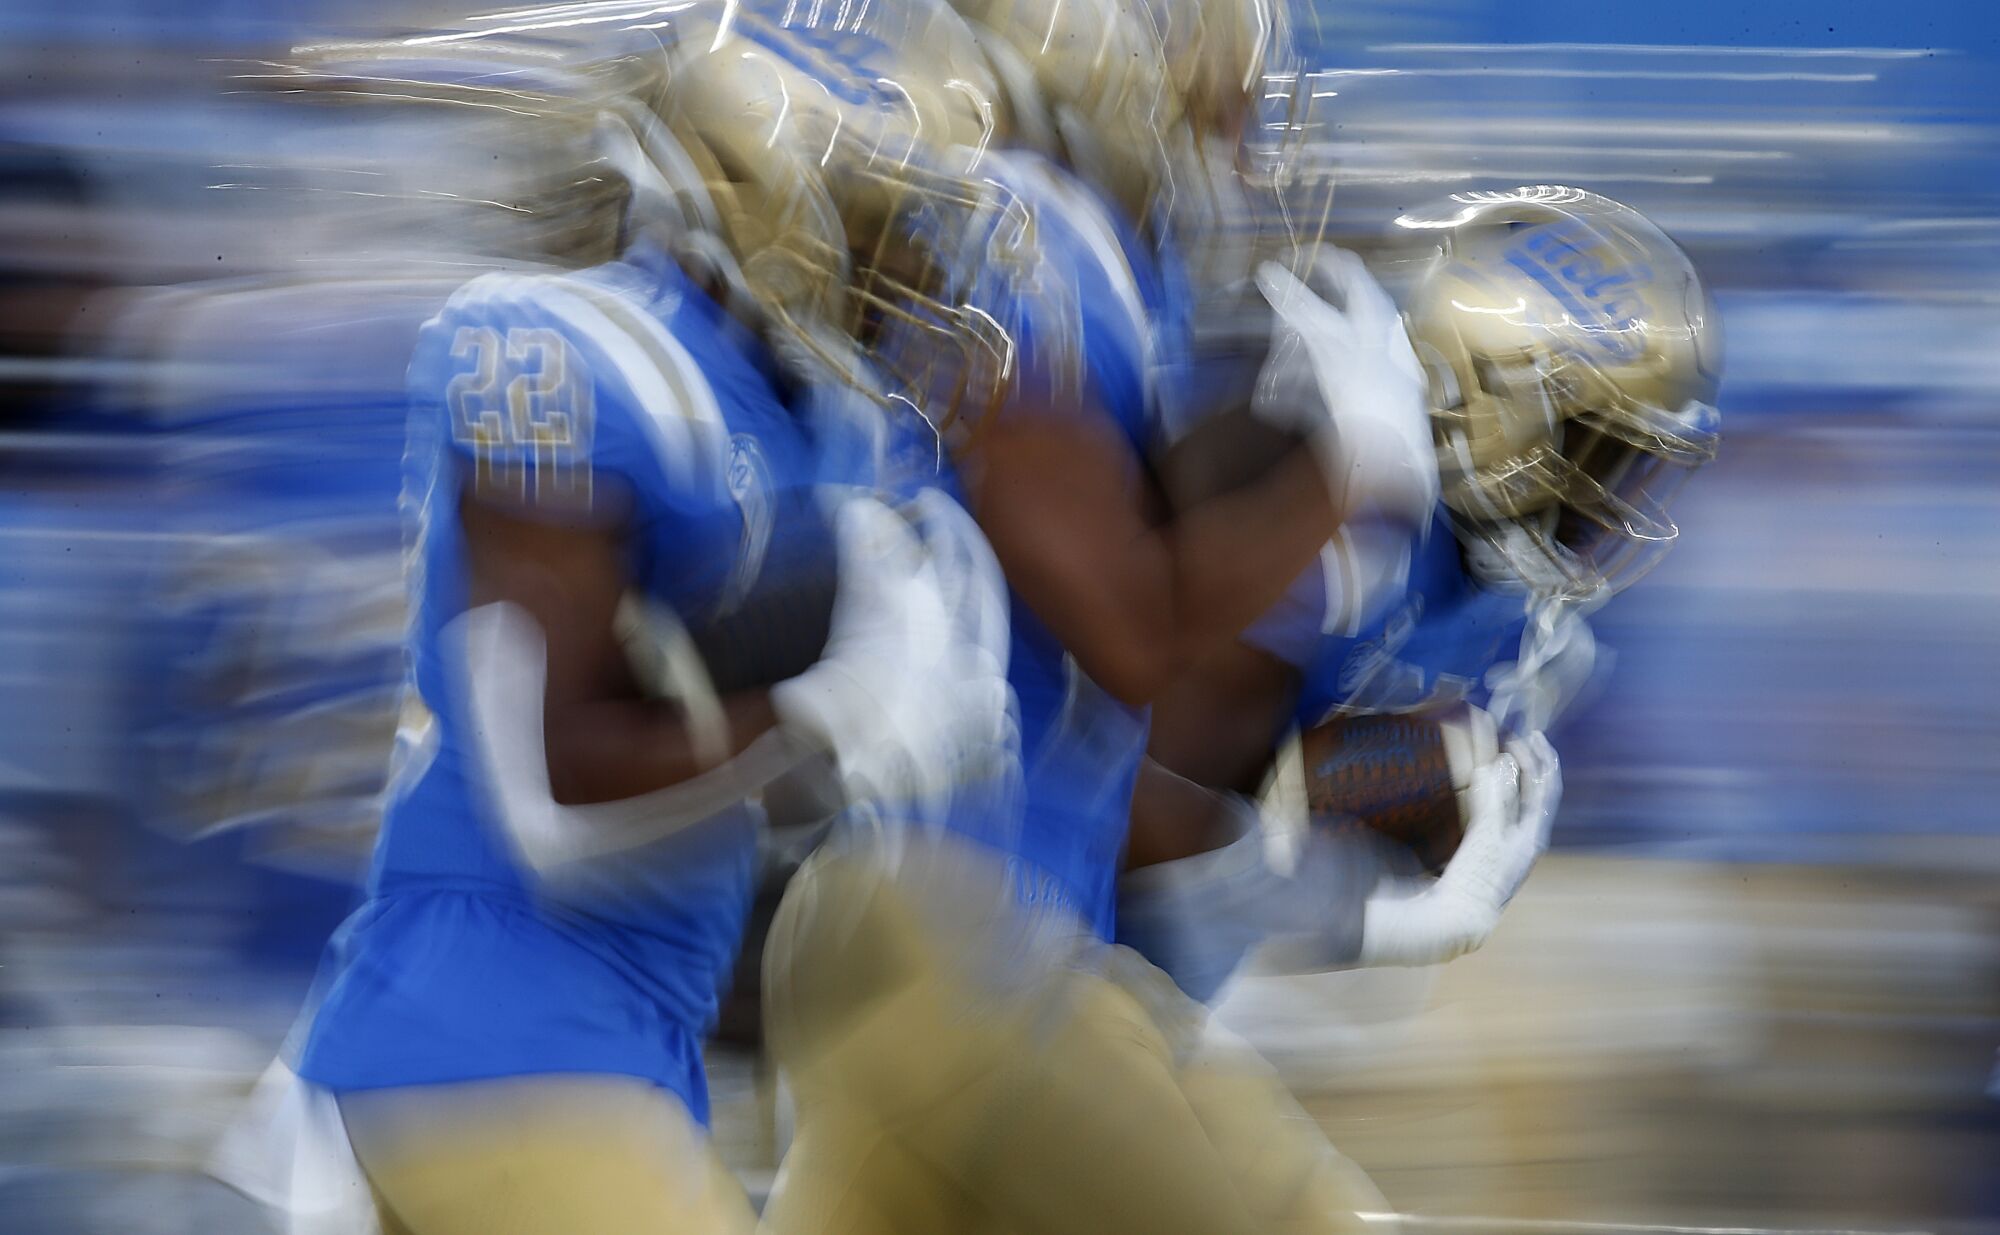 UCLA running backs warm up before playing against USC.